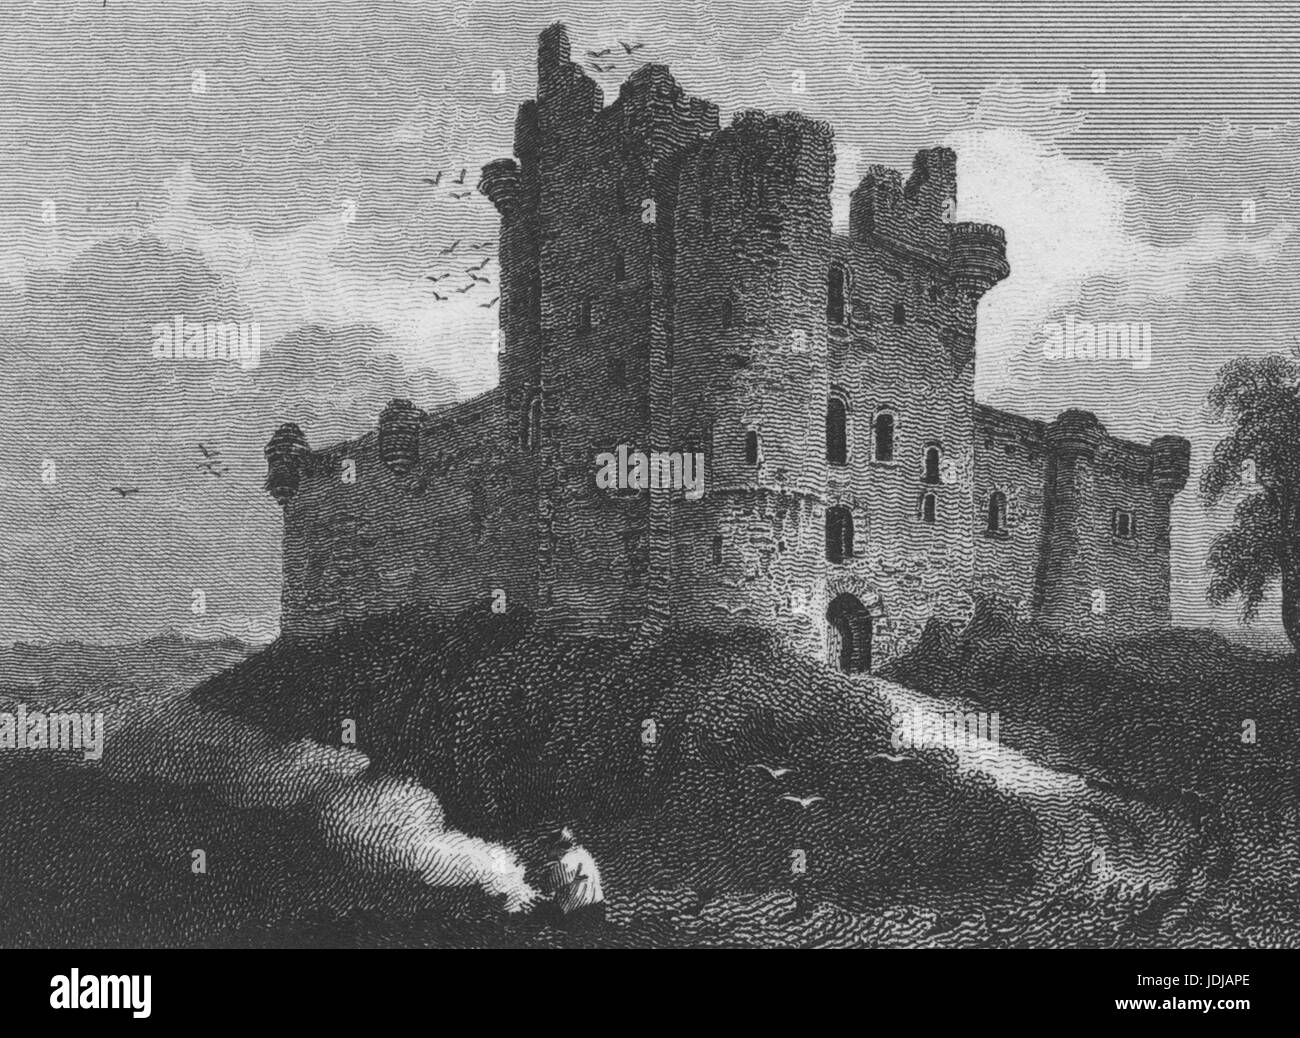 Engraving of the exterior of Doune Castle, a medieval stronghold, in Doune, Scotland, 1815. From the New York Public Library. Stock Photo